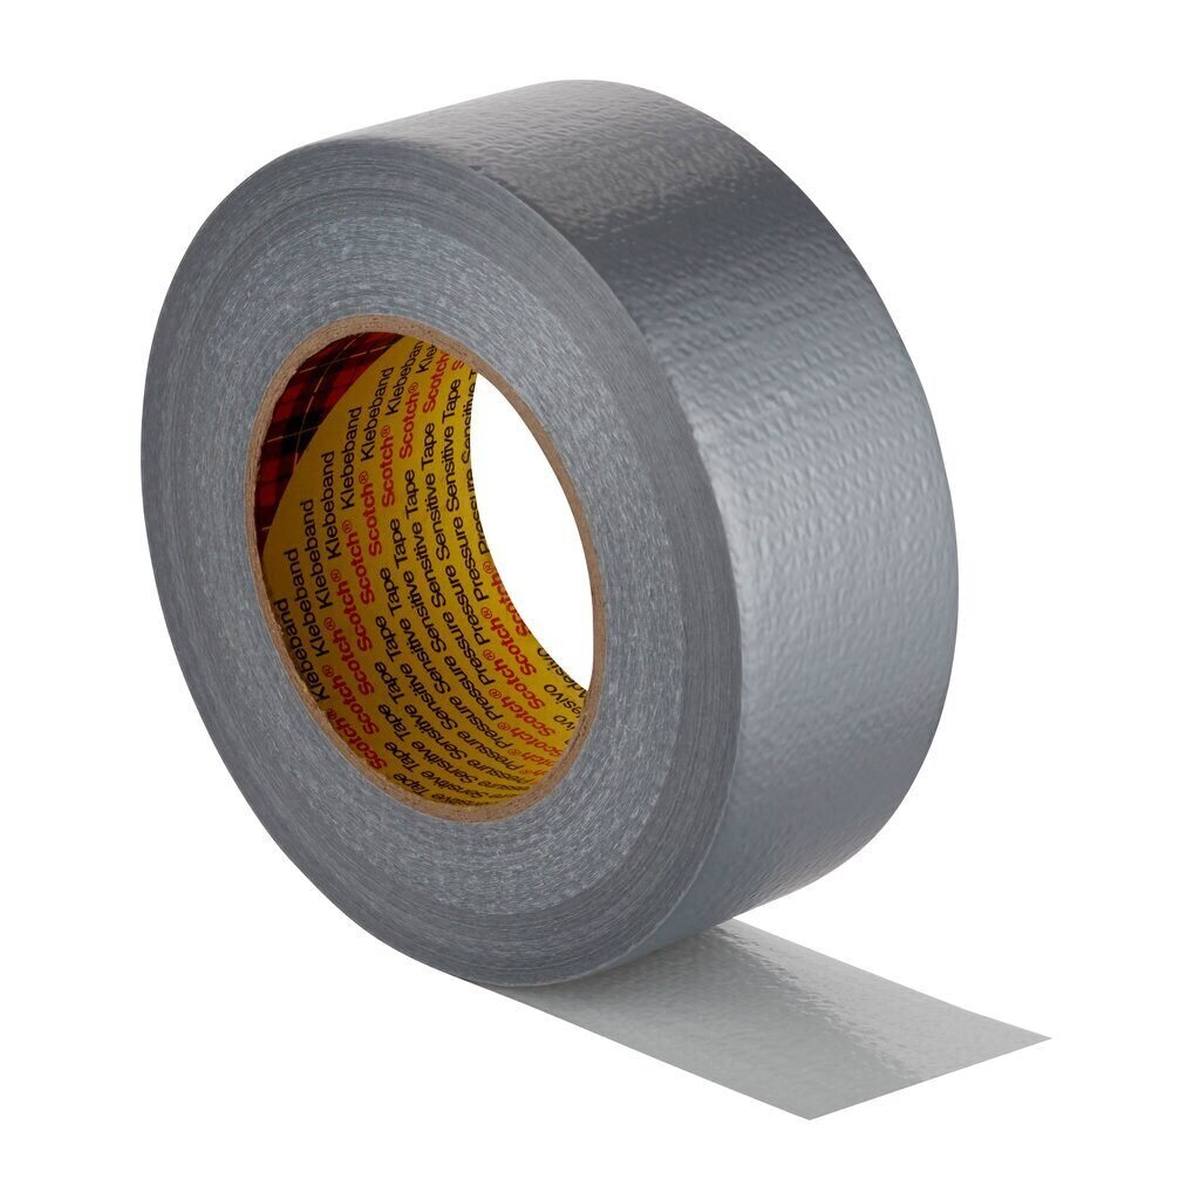 3M Fabric adhesive tape 2904, silver, 48mm x 50m, 0.19mm